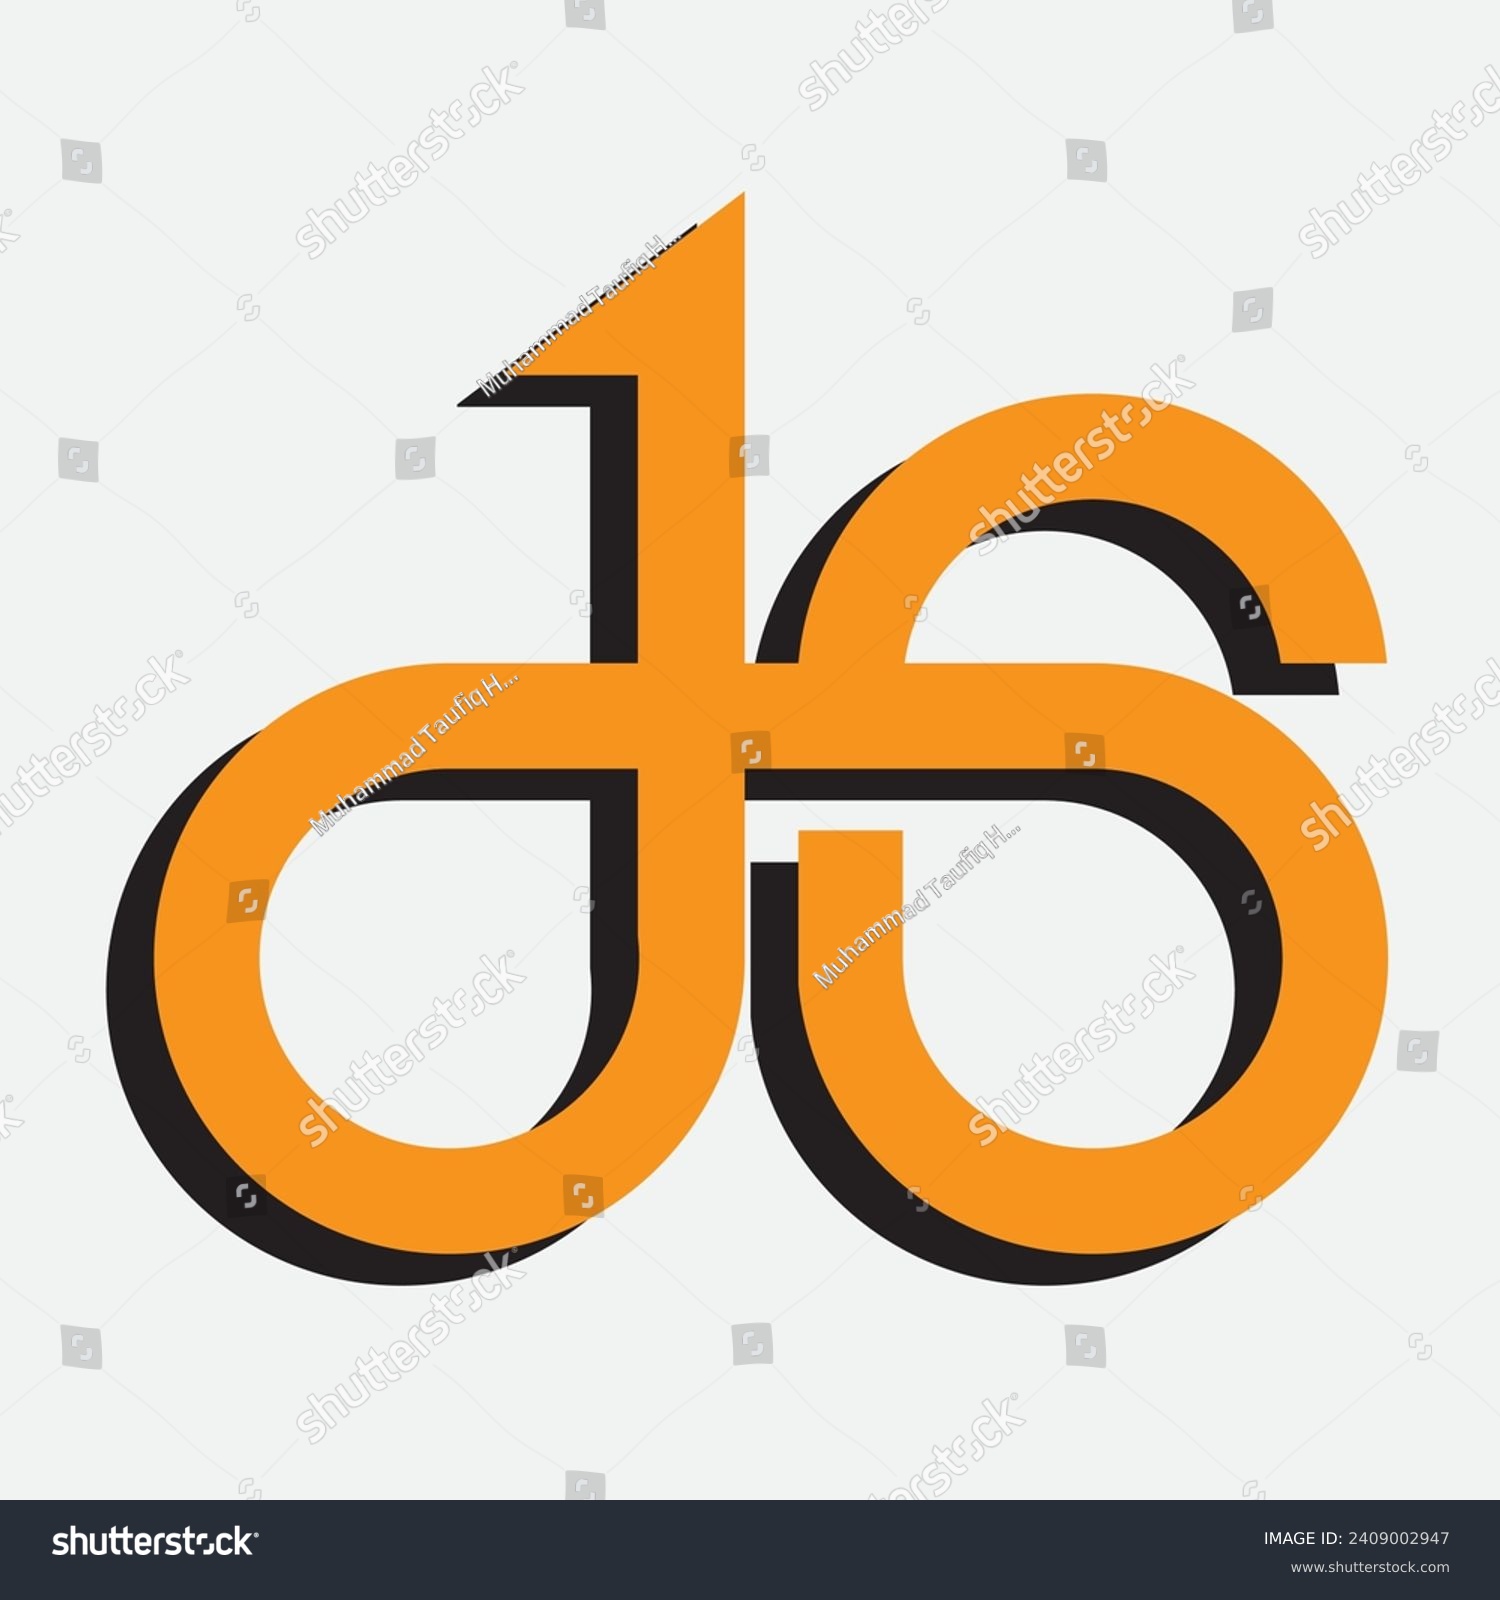 SVG of The logo with the letters ds is very simple svg